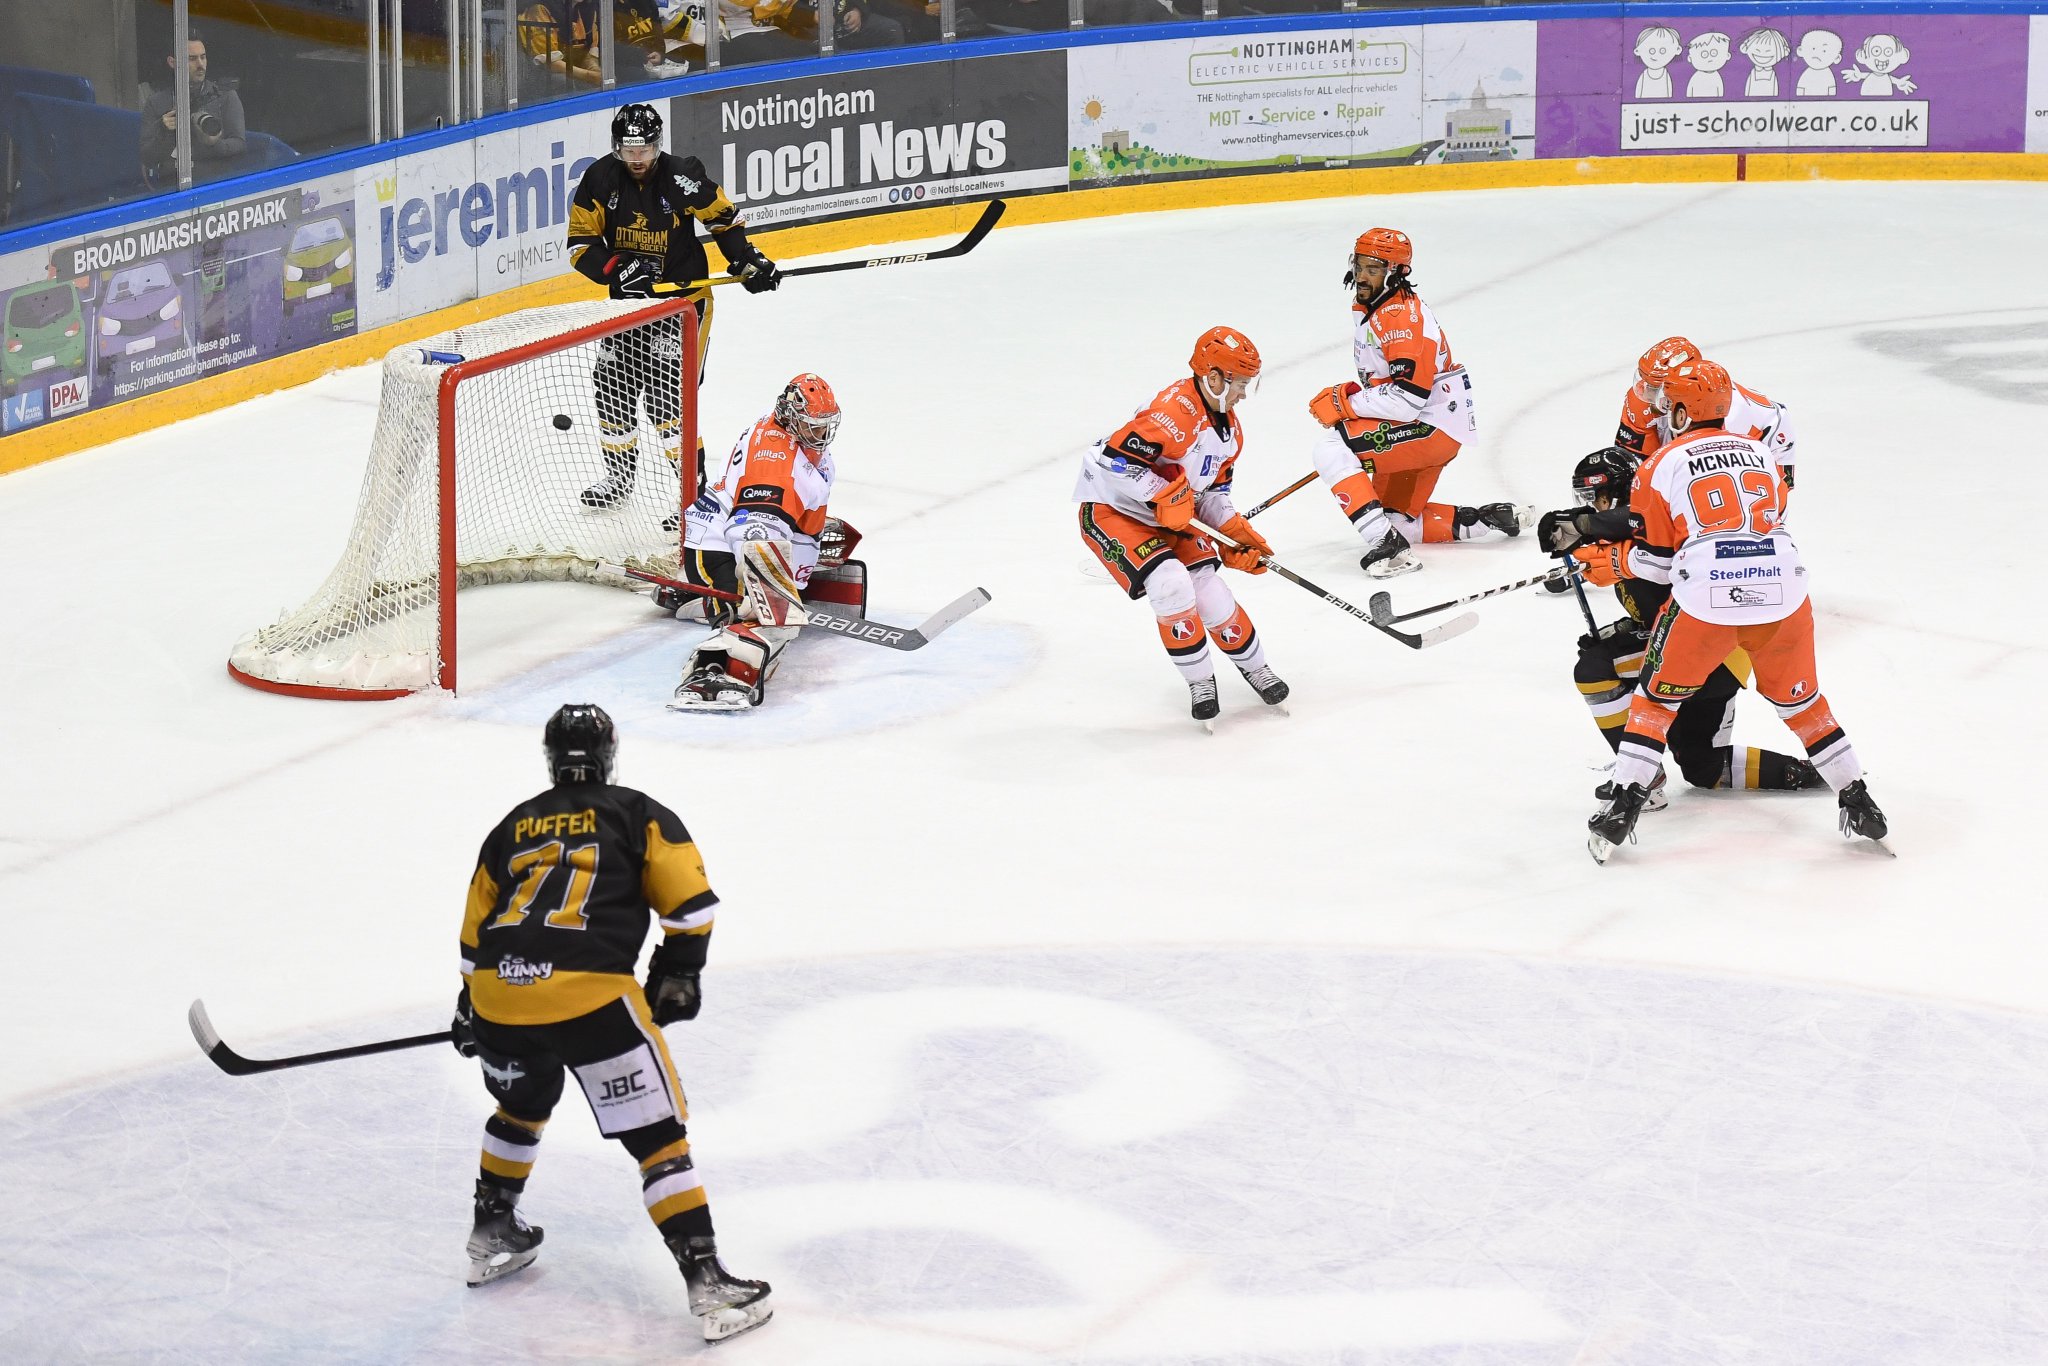 AROUND 500 TICKETS LEFT FOR VISIT OF STEELERS Top Image